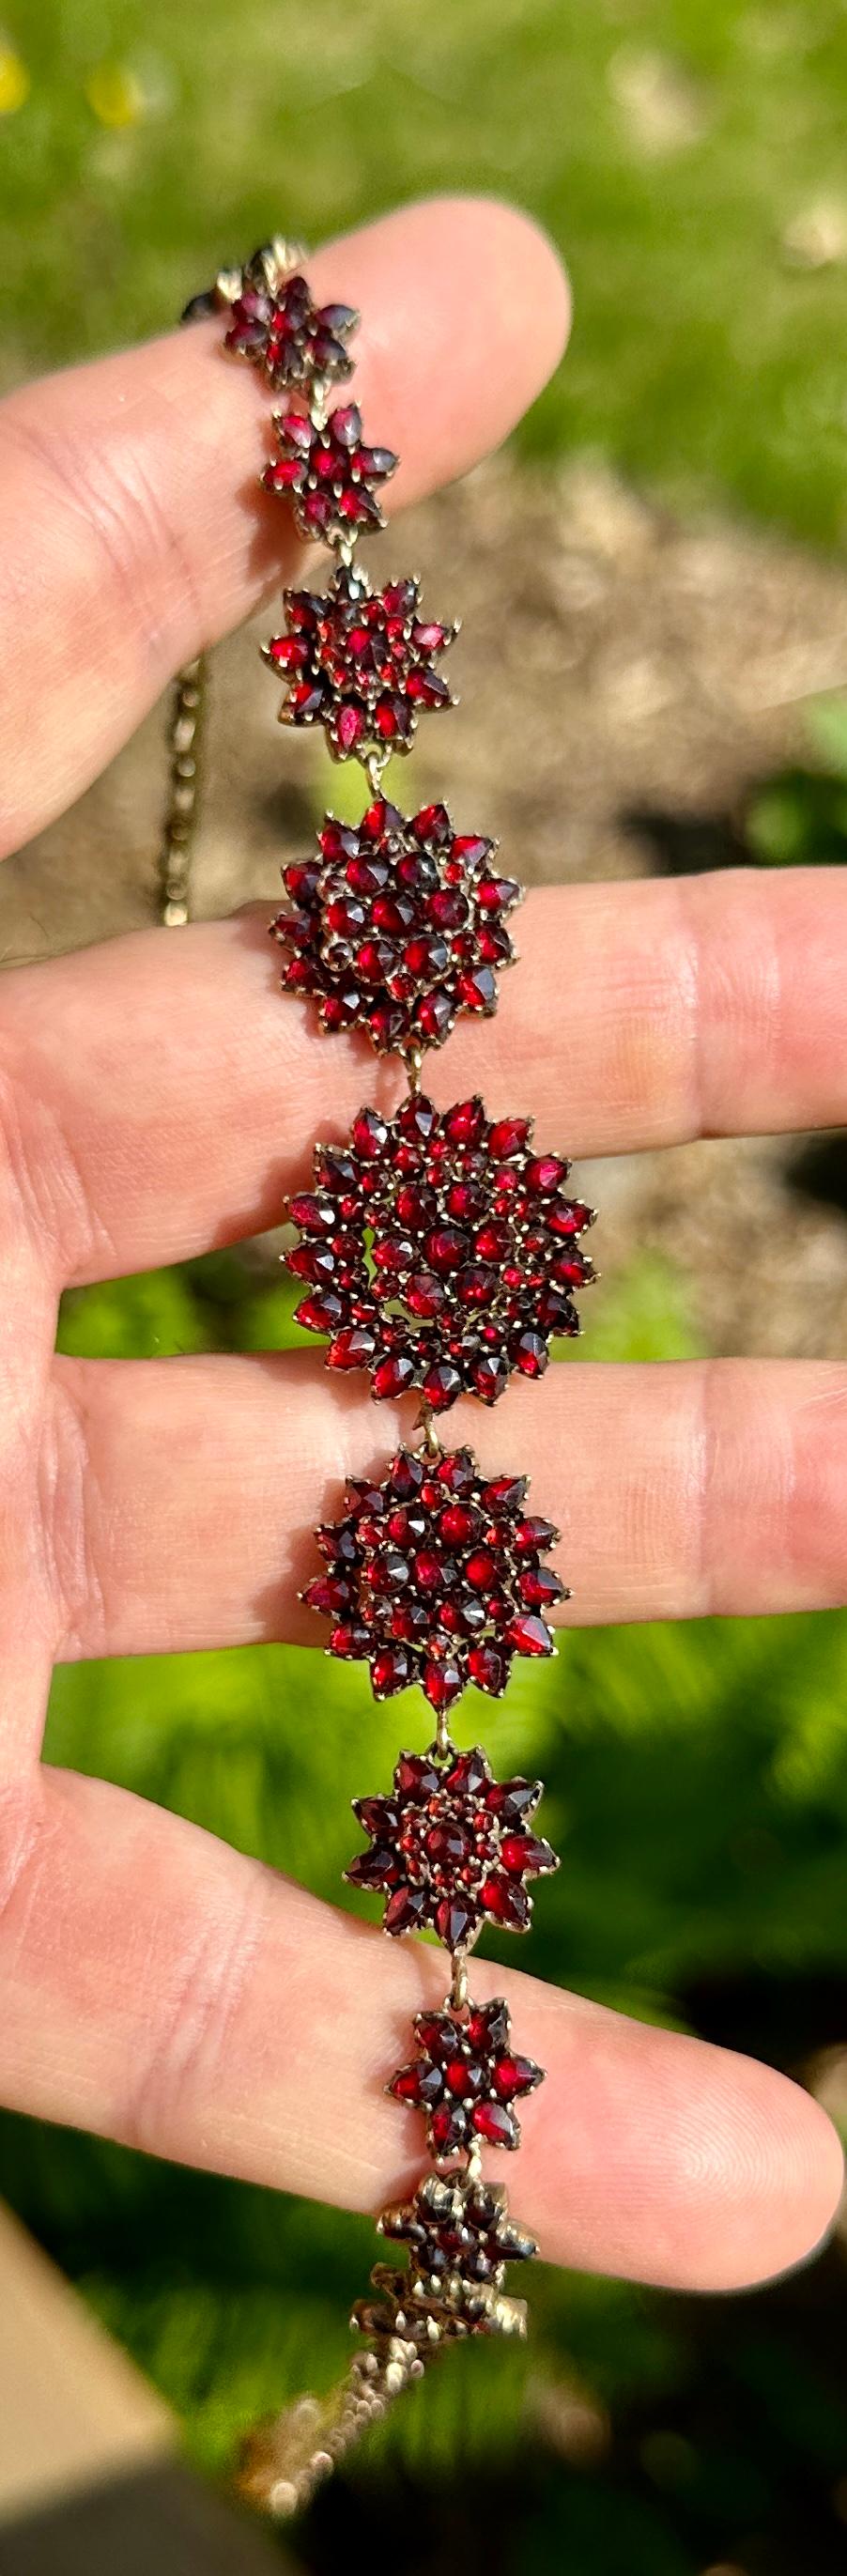 THIS IS AN ABSOLUTELY GORGEOUS 19 INCH ANTIQUE VICTORIAN BELLE EPOQUE BOHEMIAN GARNET NECKLACE WITH FLOWER FLORETS IN THE CHAIN OF SUPERB DEEP RED WINE GARNETS WITH A FLOWER MOTIF CLASP OF THE HIGHEST QUALITY DATING TO CIRCA 1850-1880. THE NECKLACE